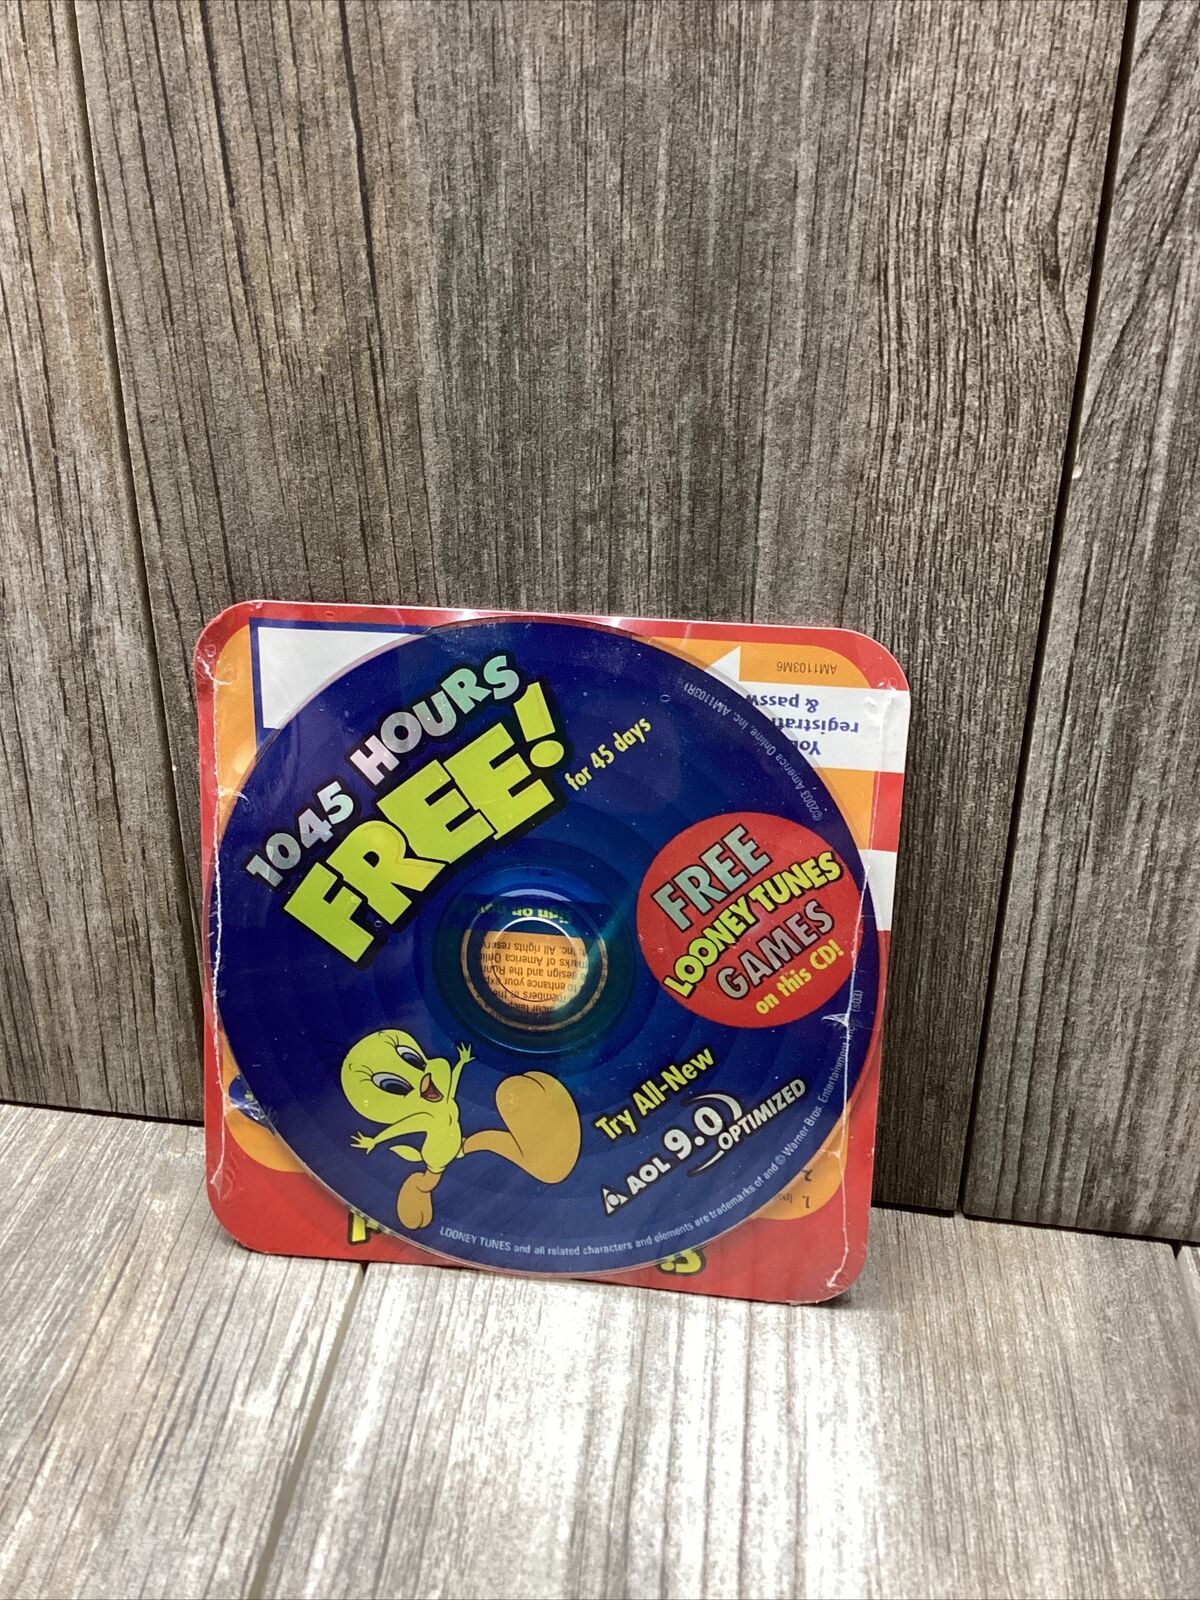 AOL 9.0 Looney Tunes Games Disc America Online Vintage Disc 1045 Free Hours NEW